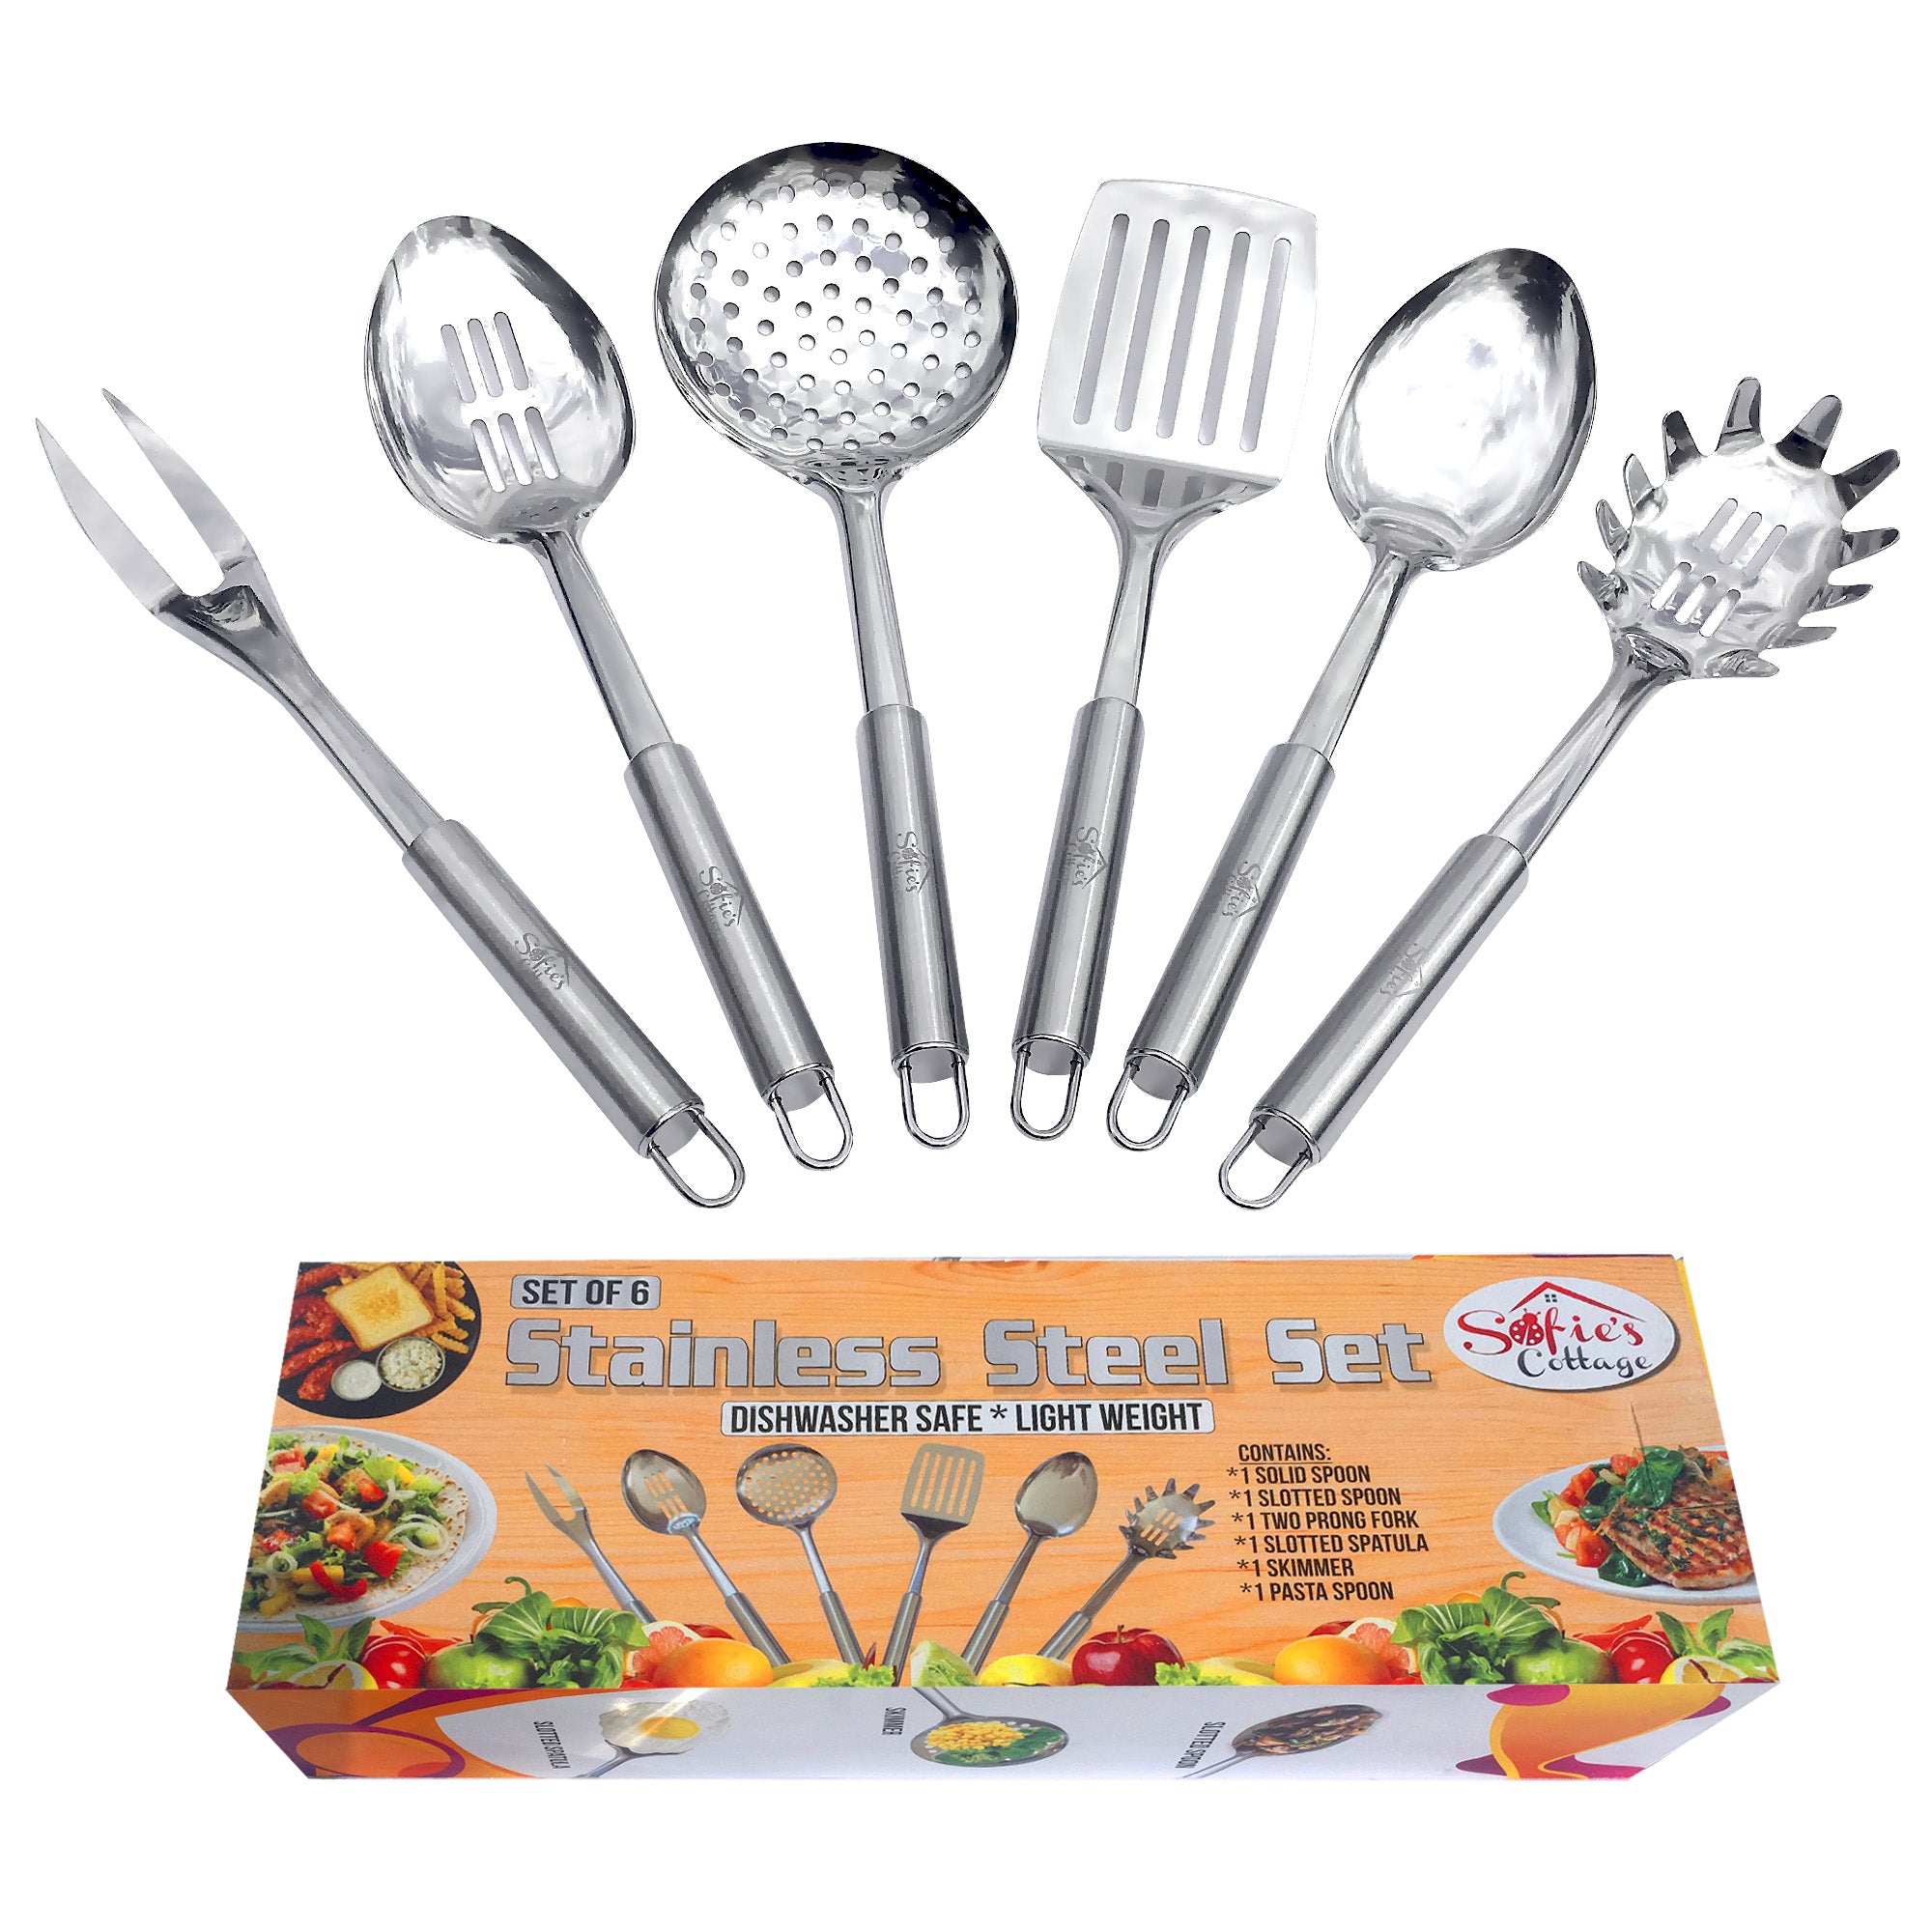 6pc Stainless Steel Cooking Utensils Set Gold Soup Ladle Spatula Rustproof Cooking Utensils Set 6pc Cooking 1 Slotted Spatula